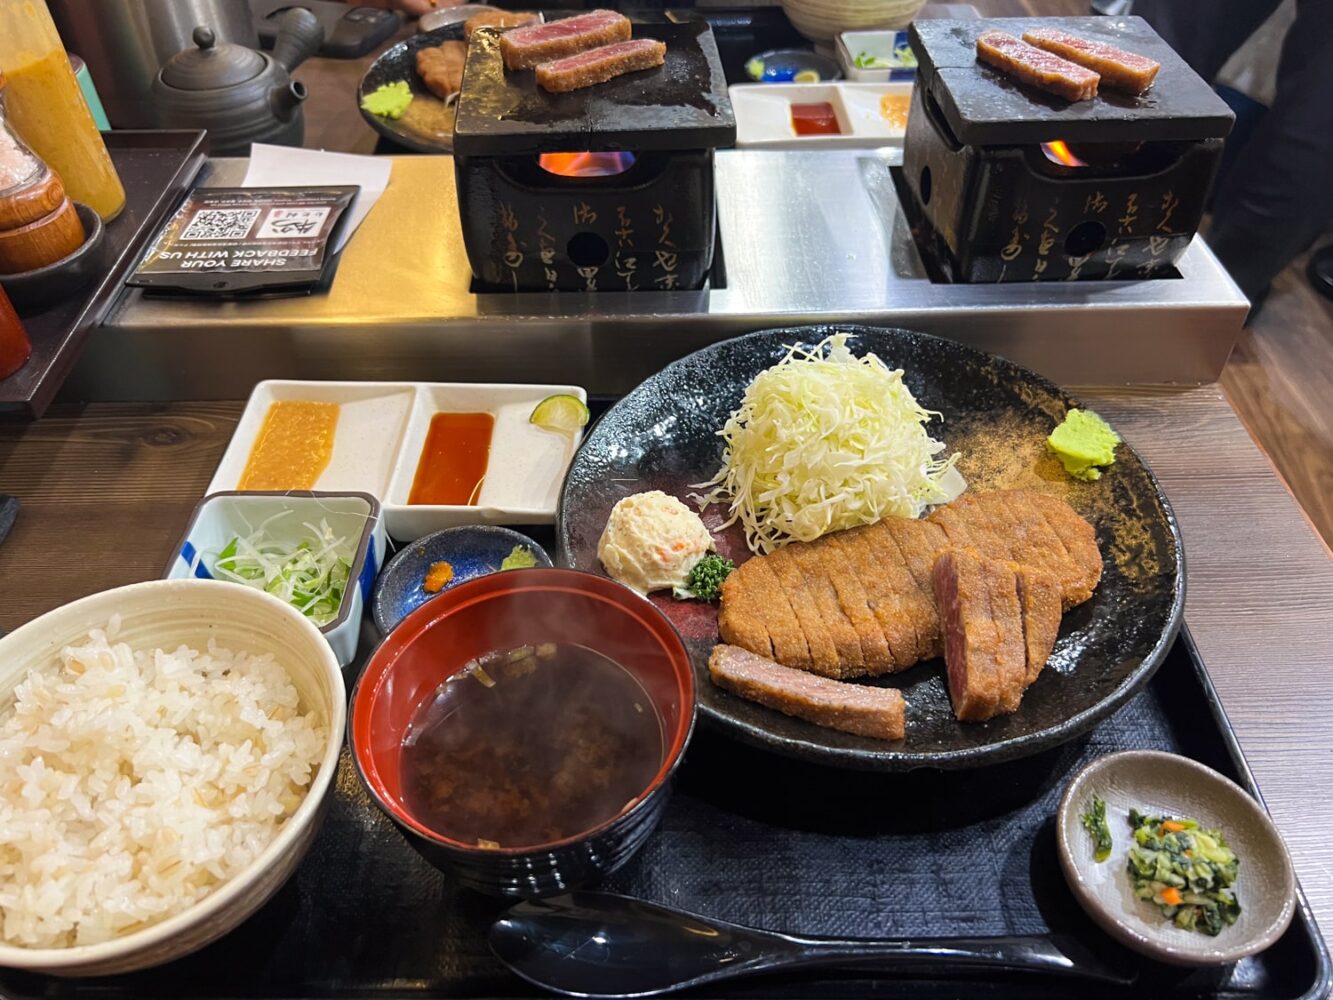 Gyukatsu set (Japanese beef cutlet) with a plate of uncooked, breaded beef cutlet, bowl of rice, dipping sauces, miso soup, and two individual hot plates for grilling gyukatsu.